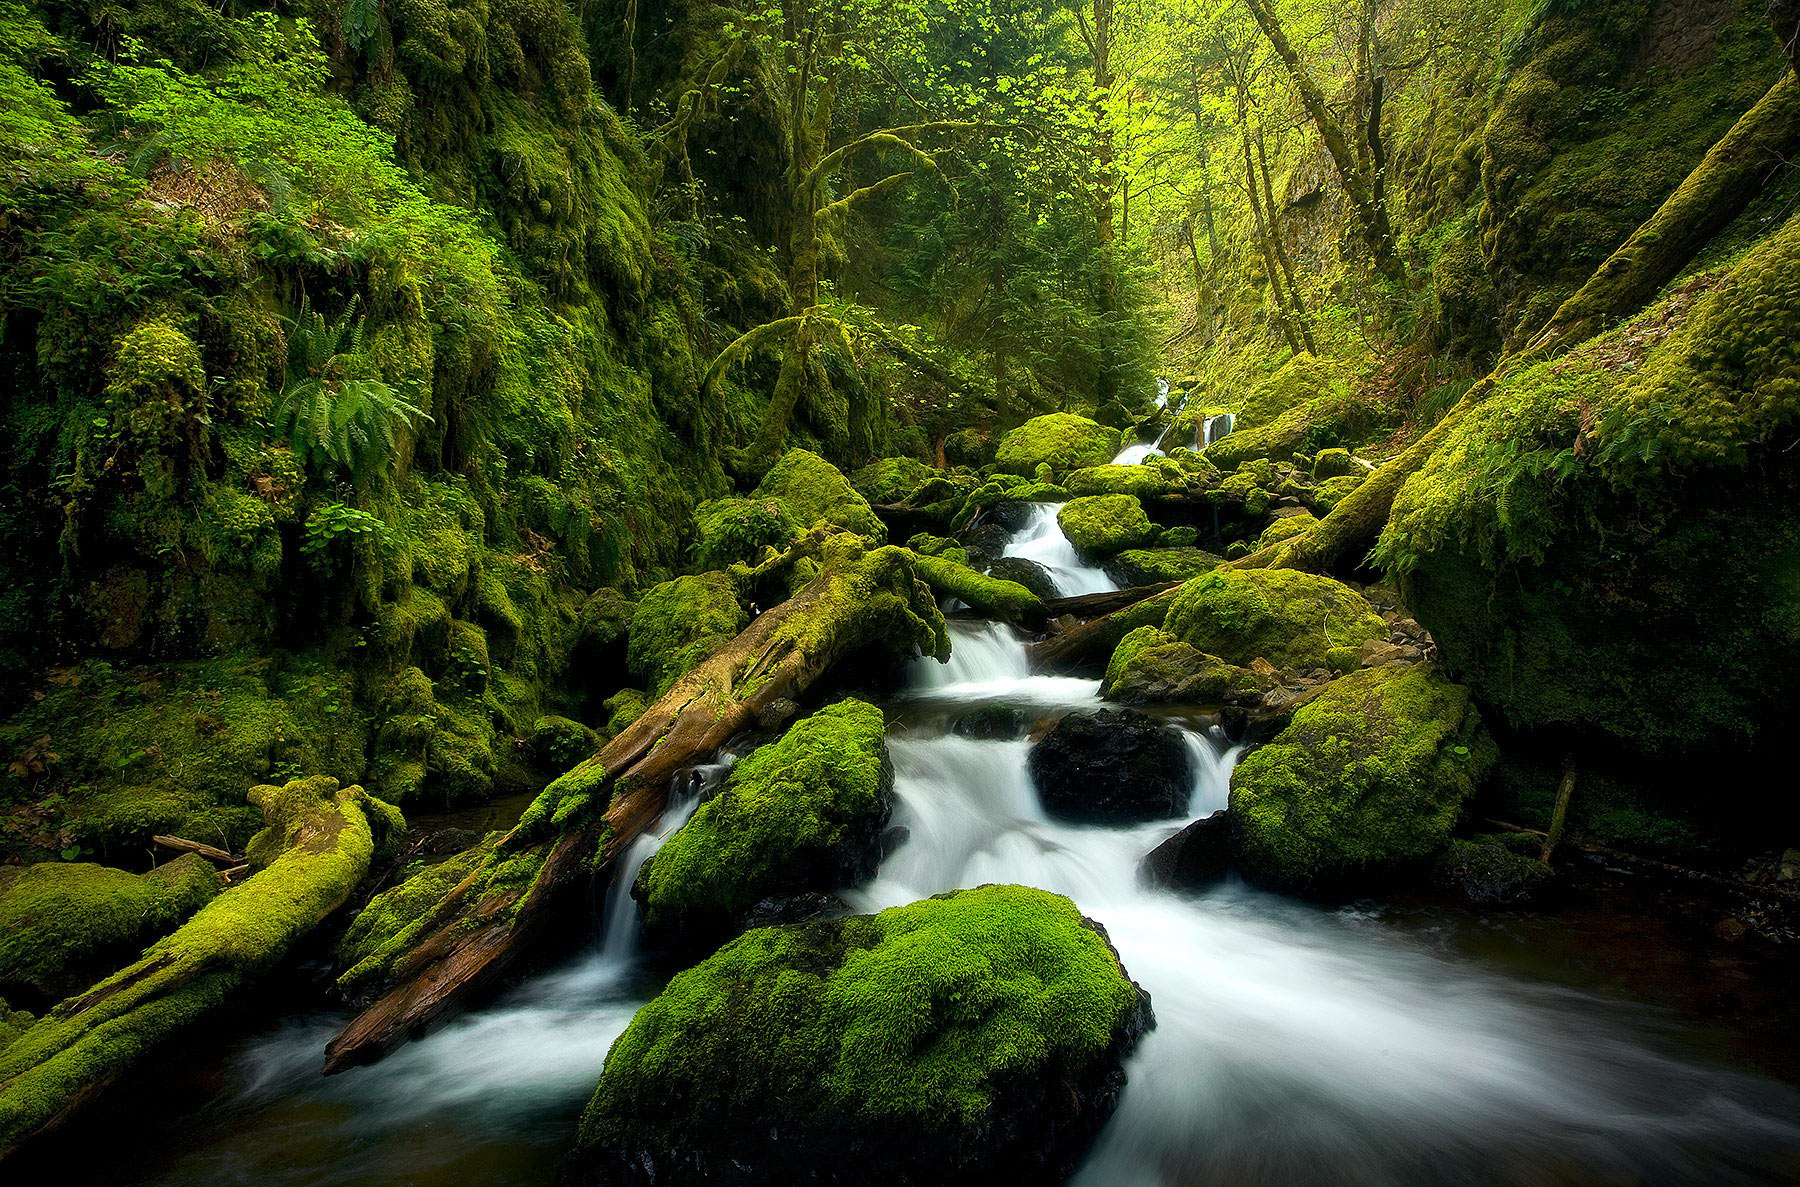 A beautiful series of cascades flowing through a mossy canyon complimented by soft background light.